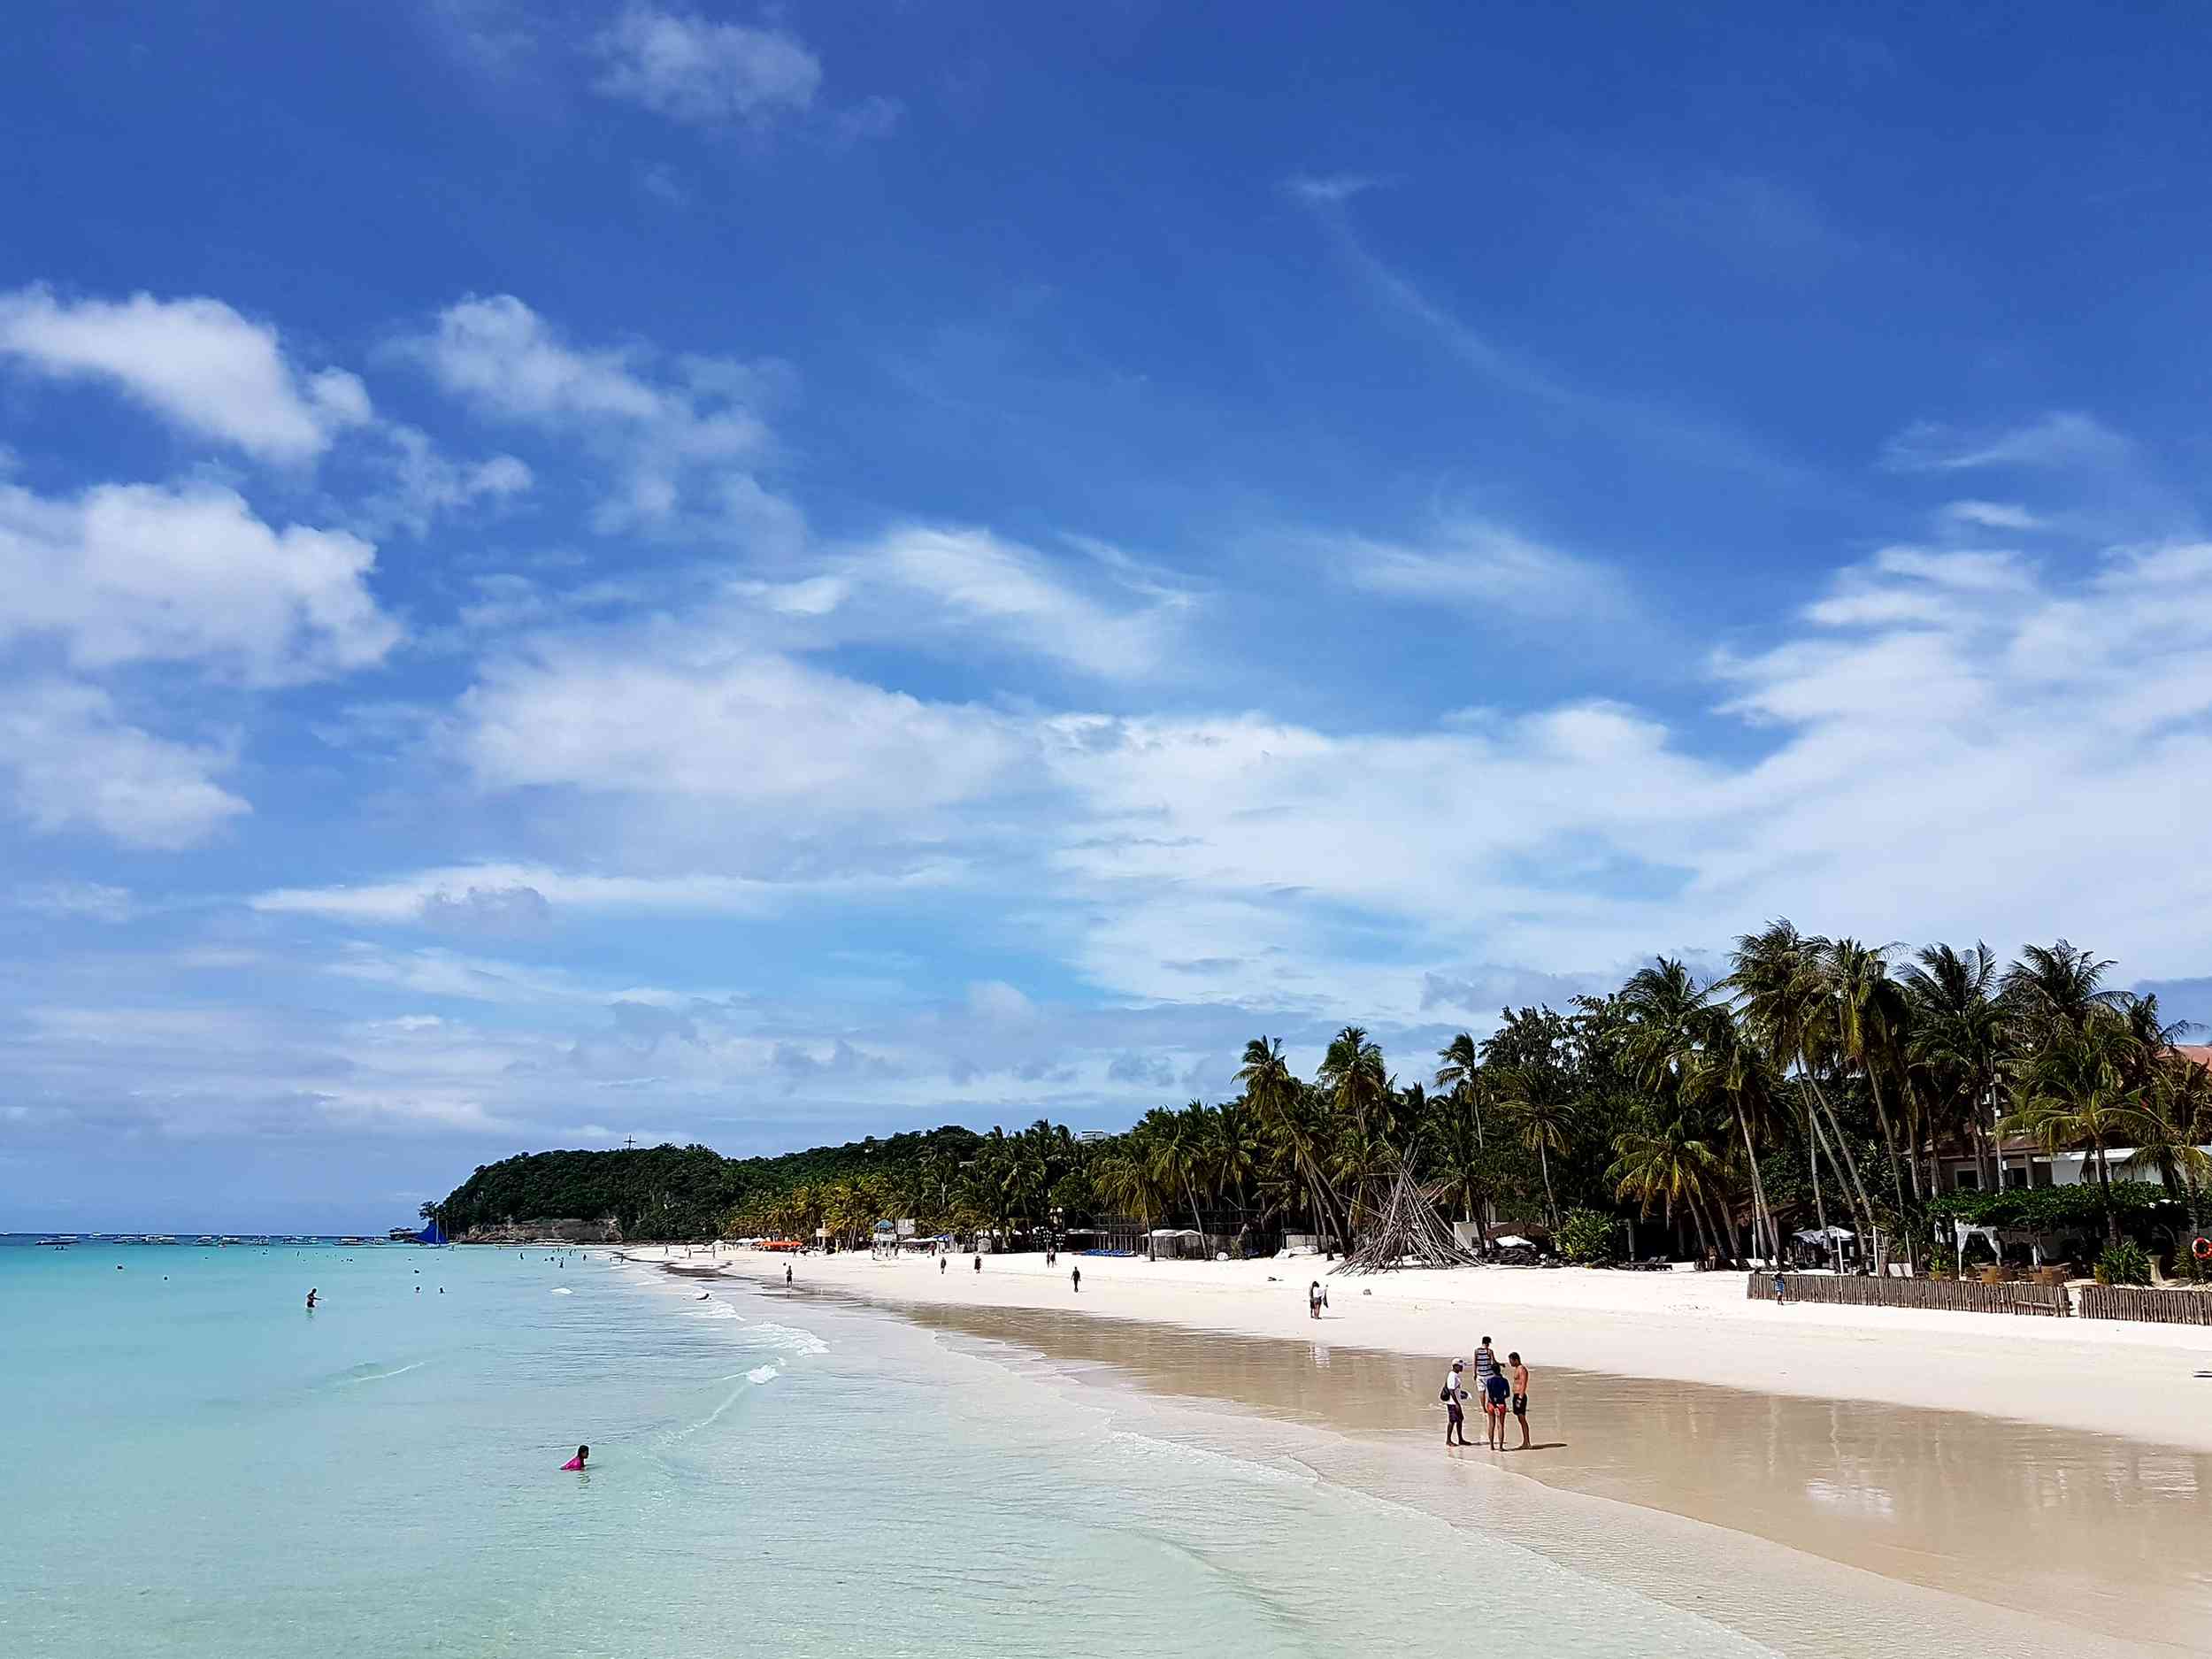 Is Boracay Tap Water Safe to Drink? Tap water & safety quality